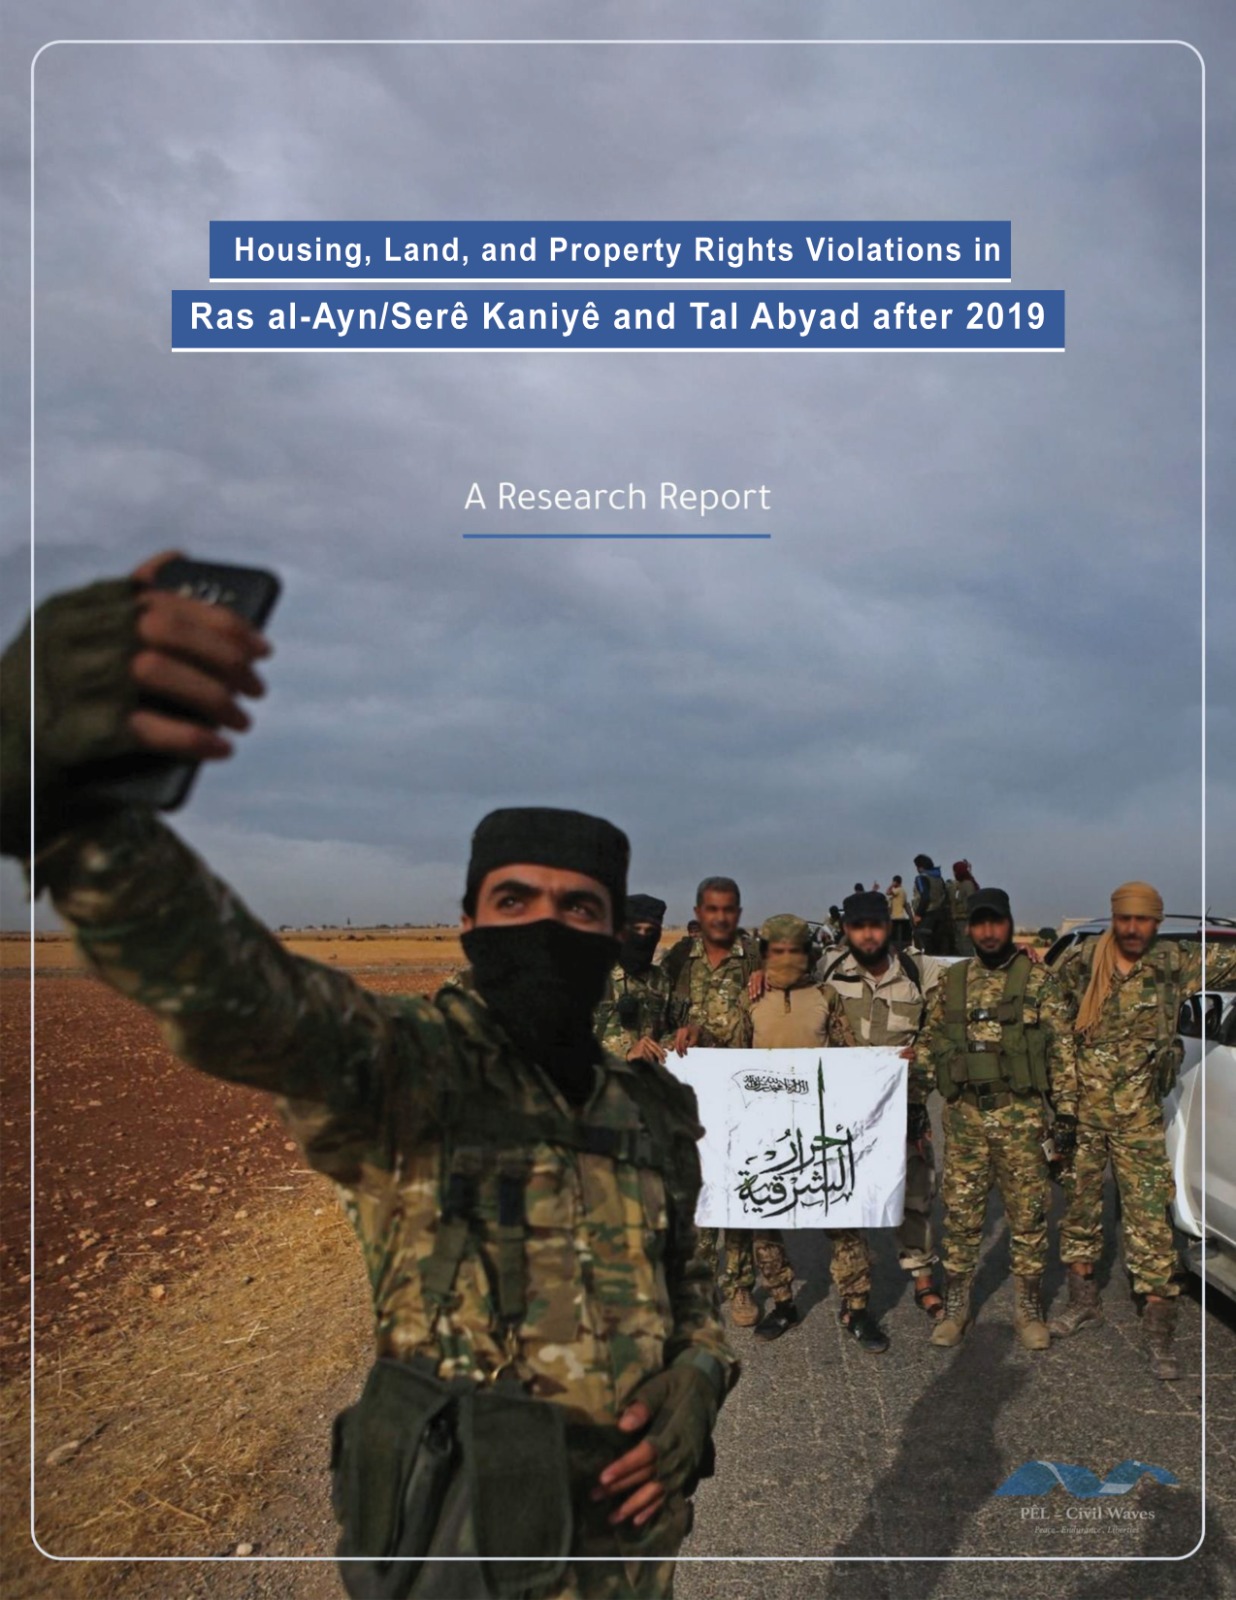 Housing, Land, and Property Rights Violations in Ras al-Ayn-Serê Kaniyê and Tal Abyad after 2019